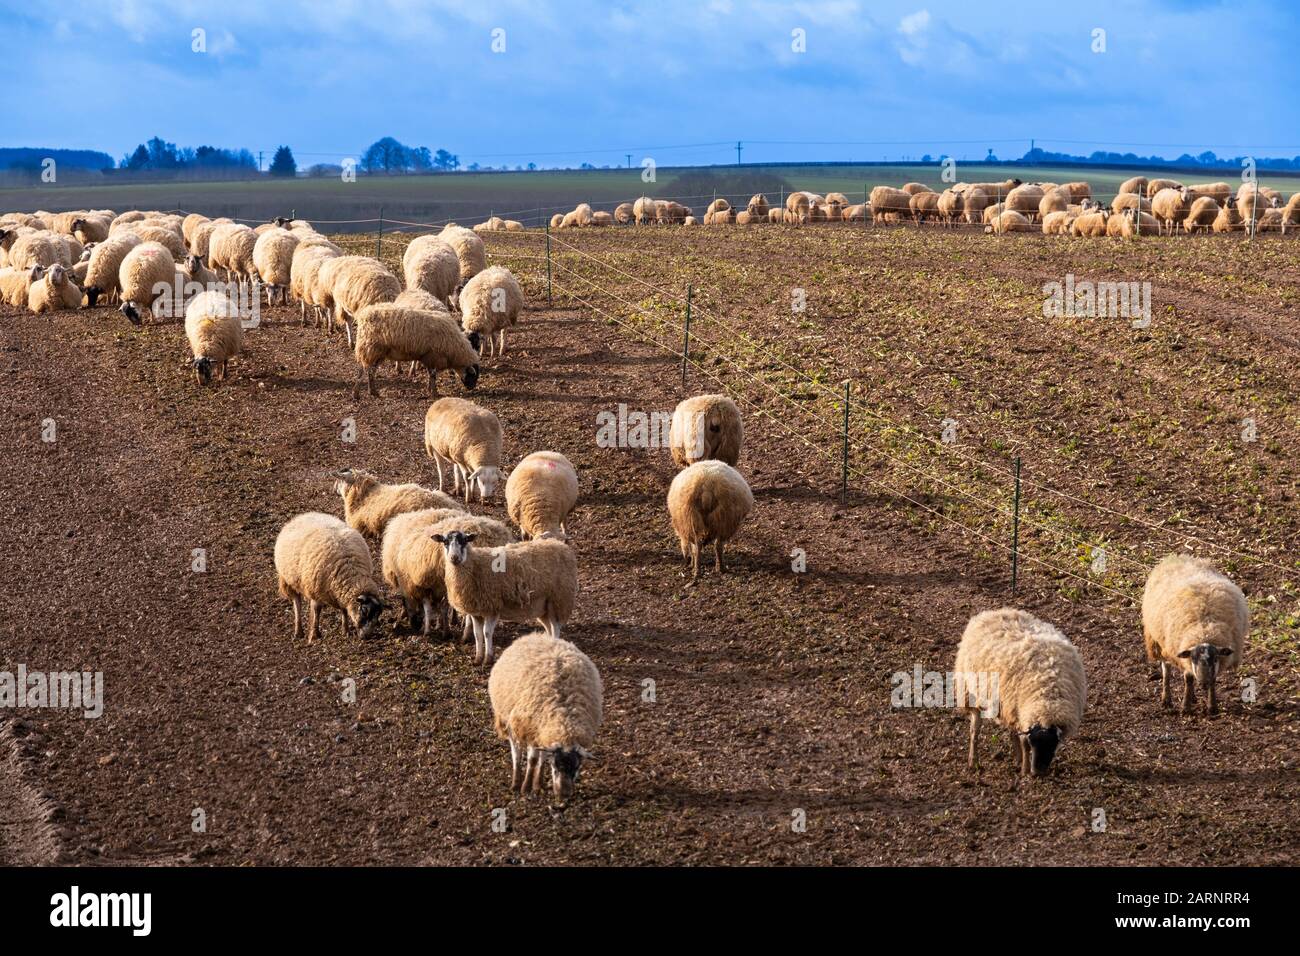 A large flock of sheep in a field of bare muddy earth. Stock Photo